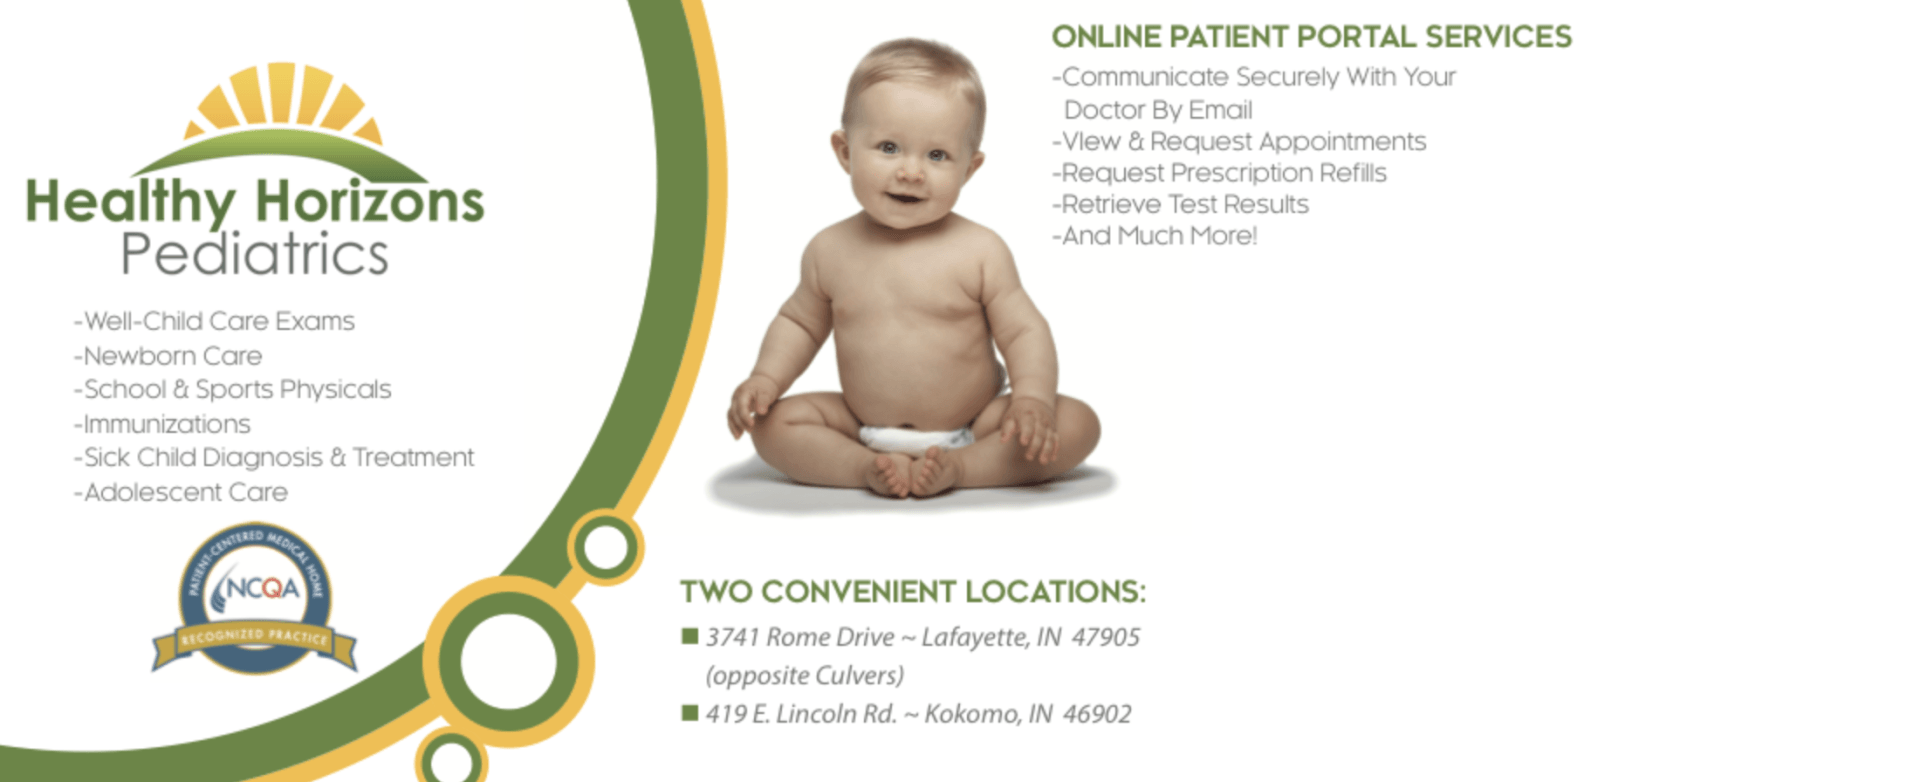 An advertisement for healthy horizons pediatrics shows a baby in a diaper.